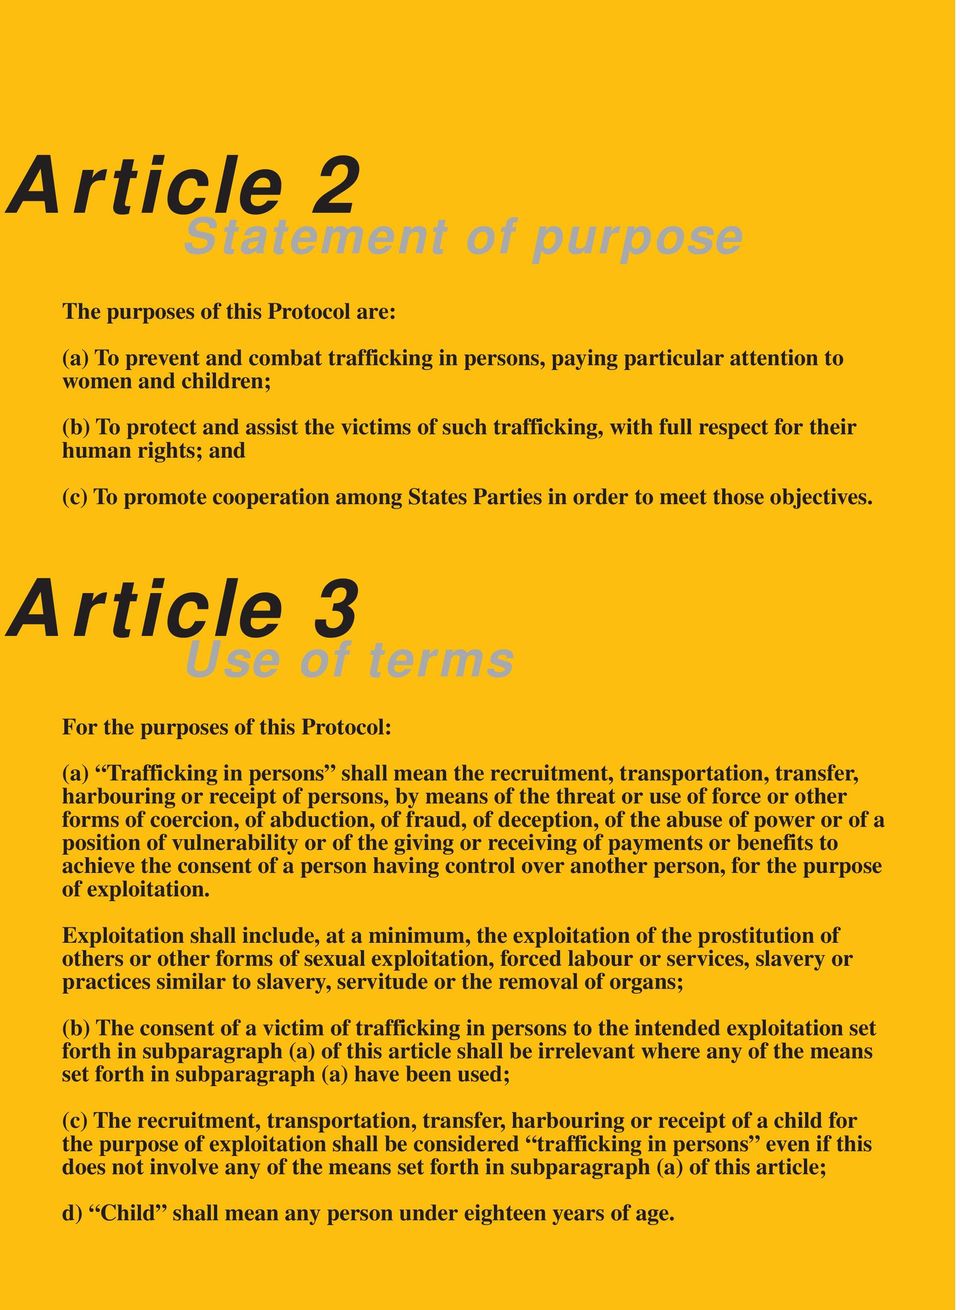 Article 3 Use of terms For the purposes of this Protocol: (a) Trafficking in persons shall mean the recruitment, transportation, transfer, harbouring or receipt of persons, by means of the threat or